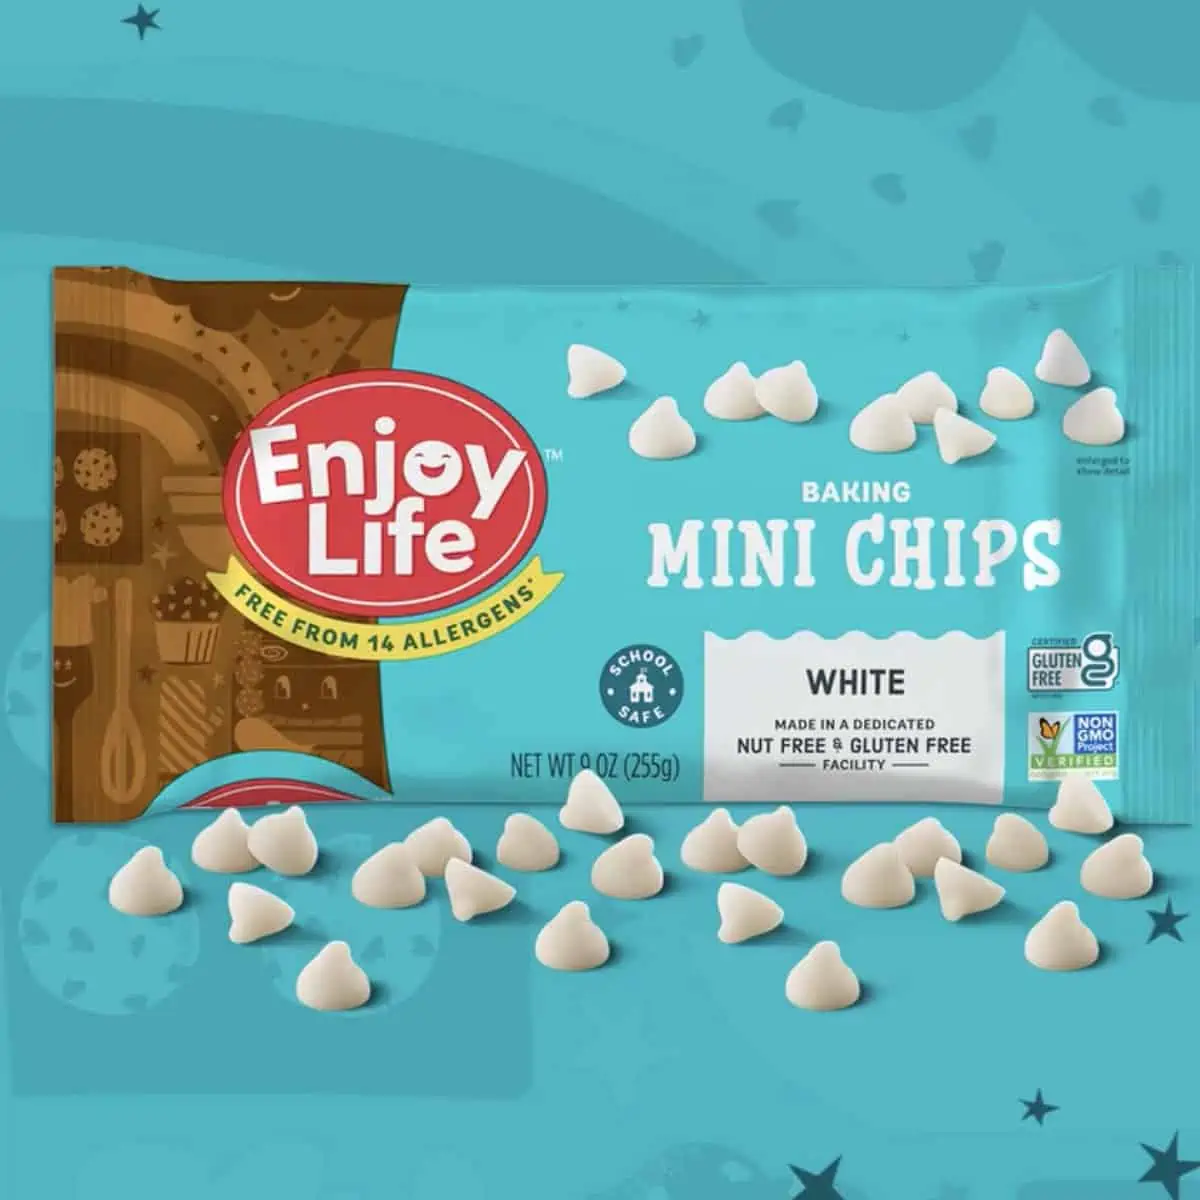 Vegan white chocolate chips from the brand Enjoy Life. 